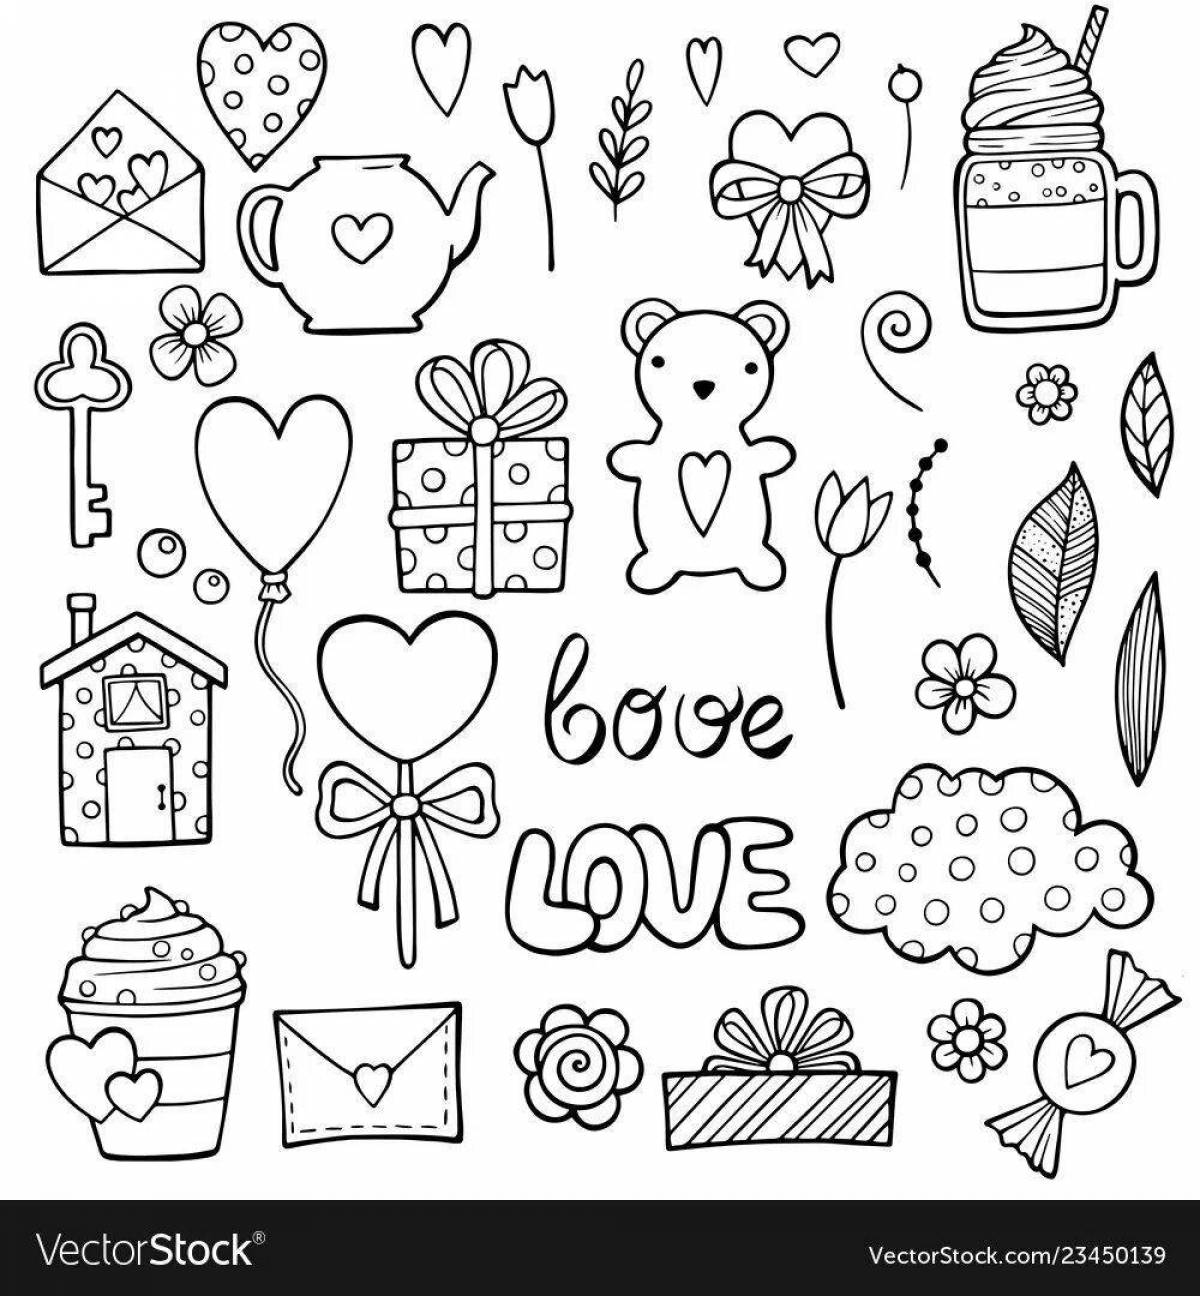 Dazzling stickers for coloring pages